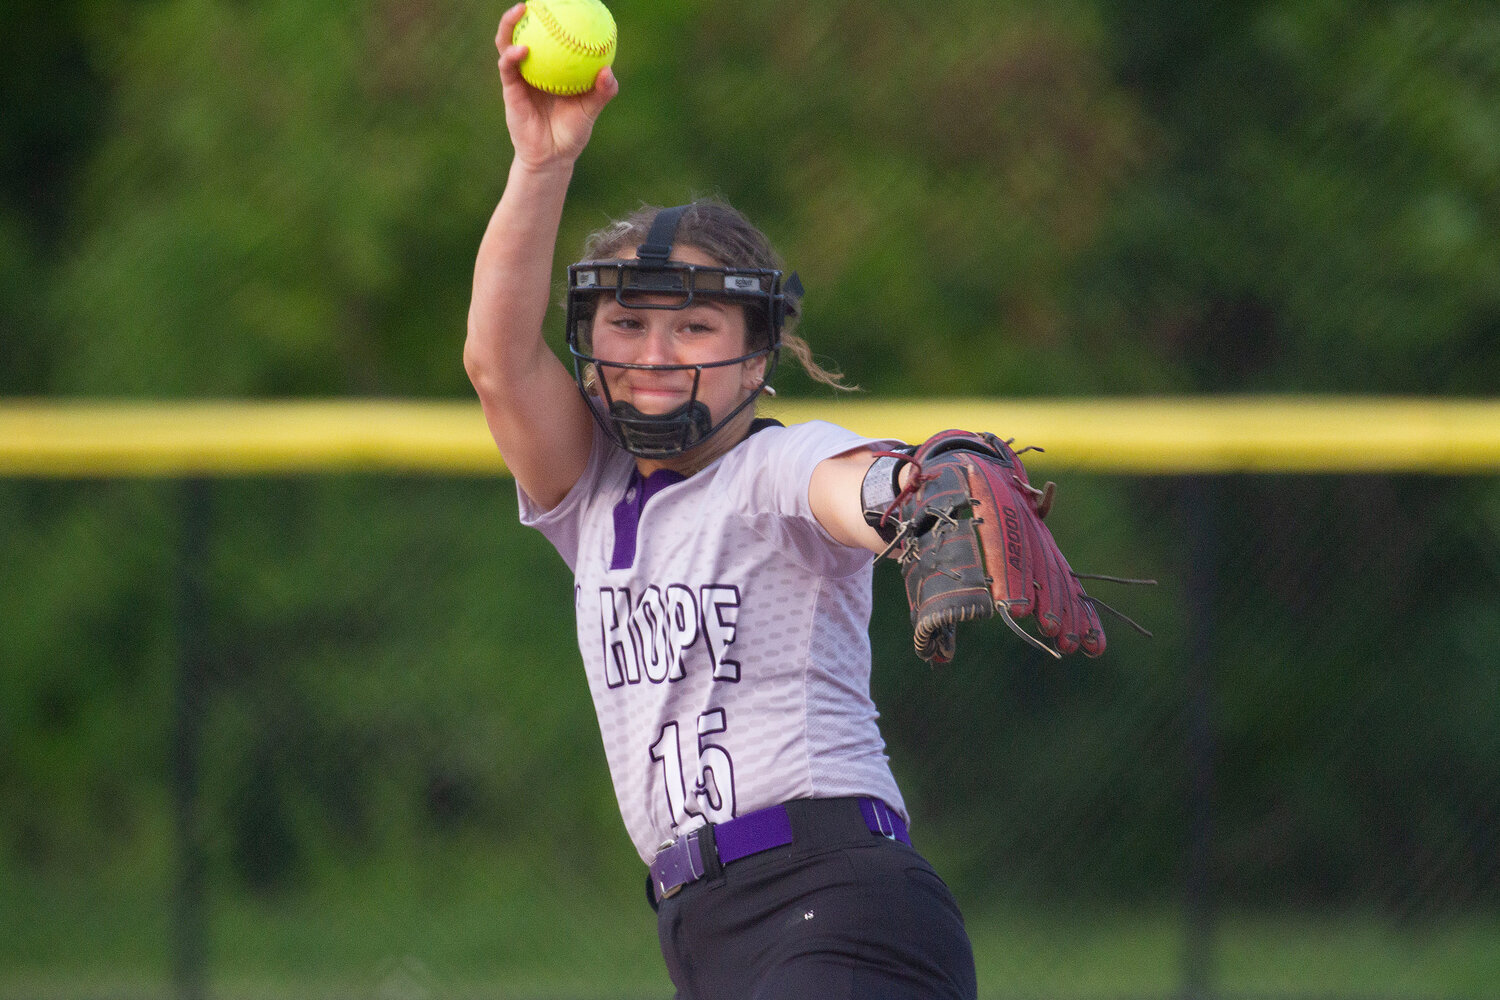 Pitching ace Reily Amaral and the Huskies softball team softball team host West Warwick at the high school on Thursday at 5 p.m., in the double elimination-first round of the eight team Division II championship bracket.